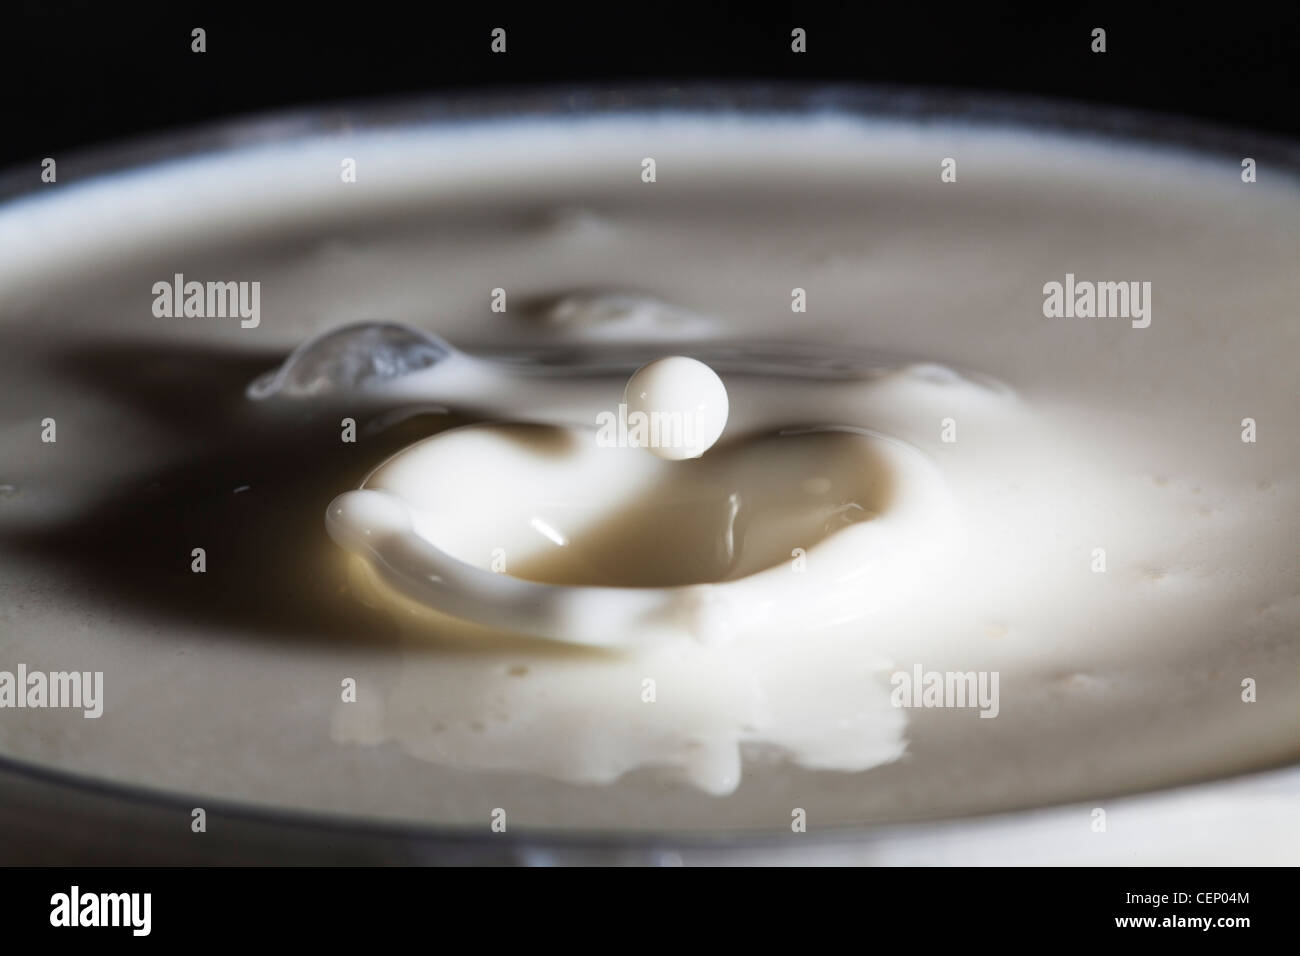 Shapes created by drops of milk and milk splashes Stock Photo